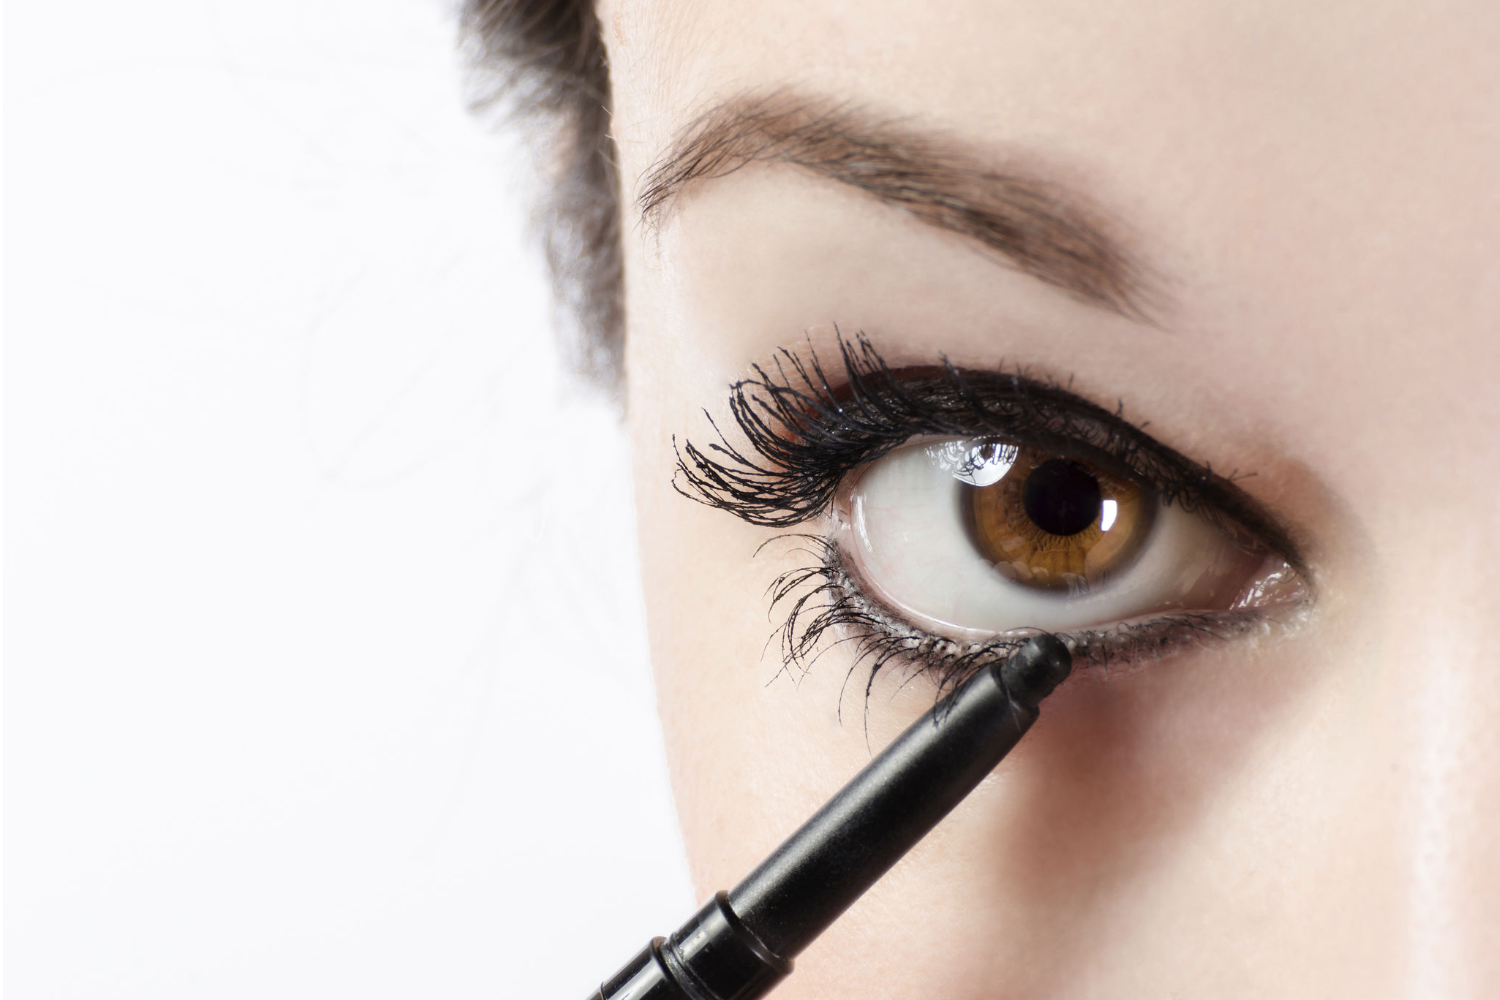 The 6 Worst Kajal Eyeliner Mistakes You Could Be Making